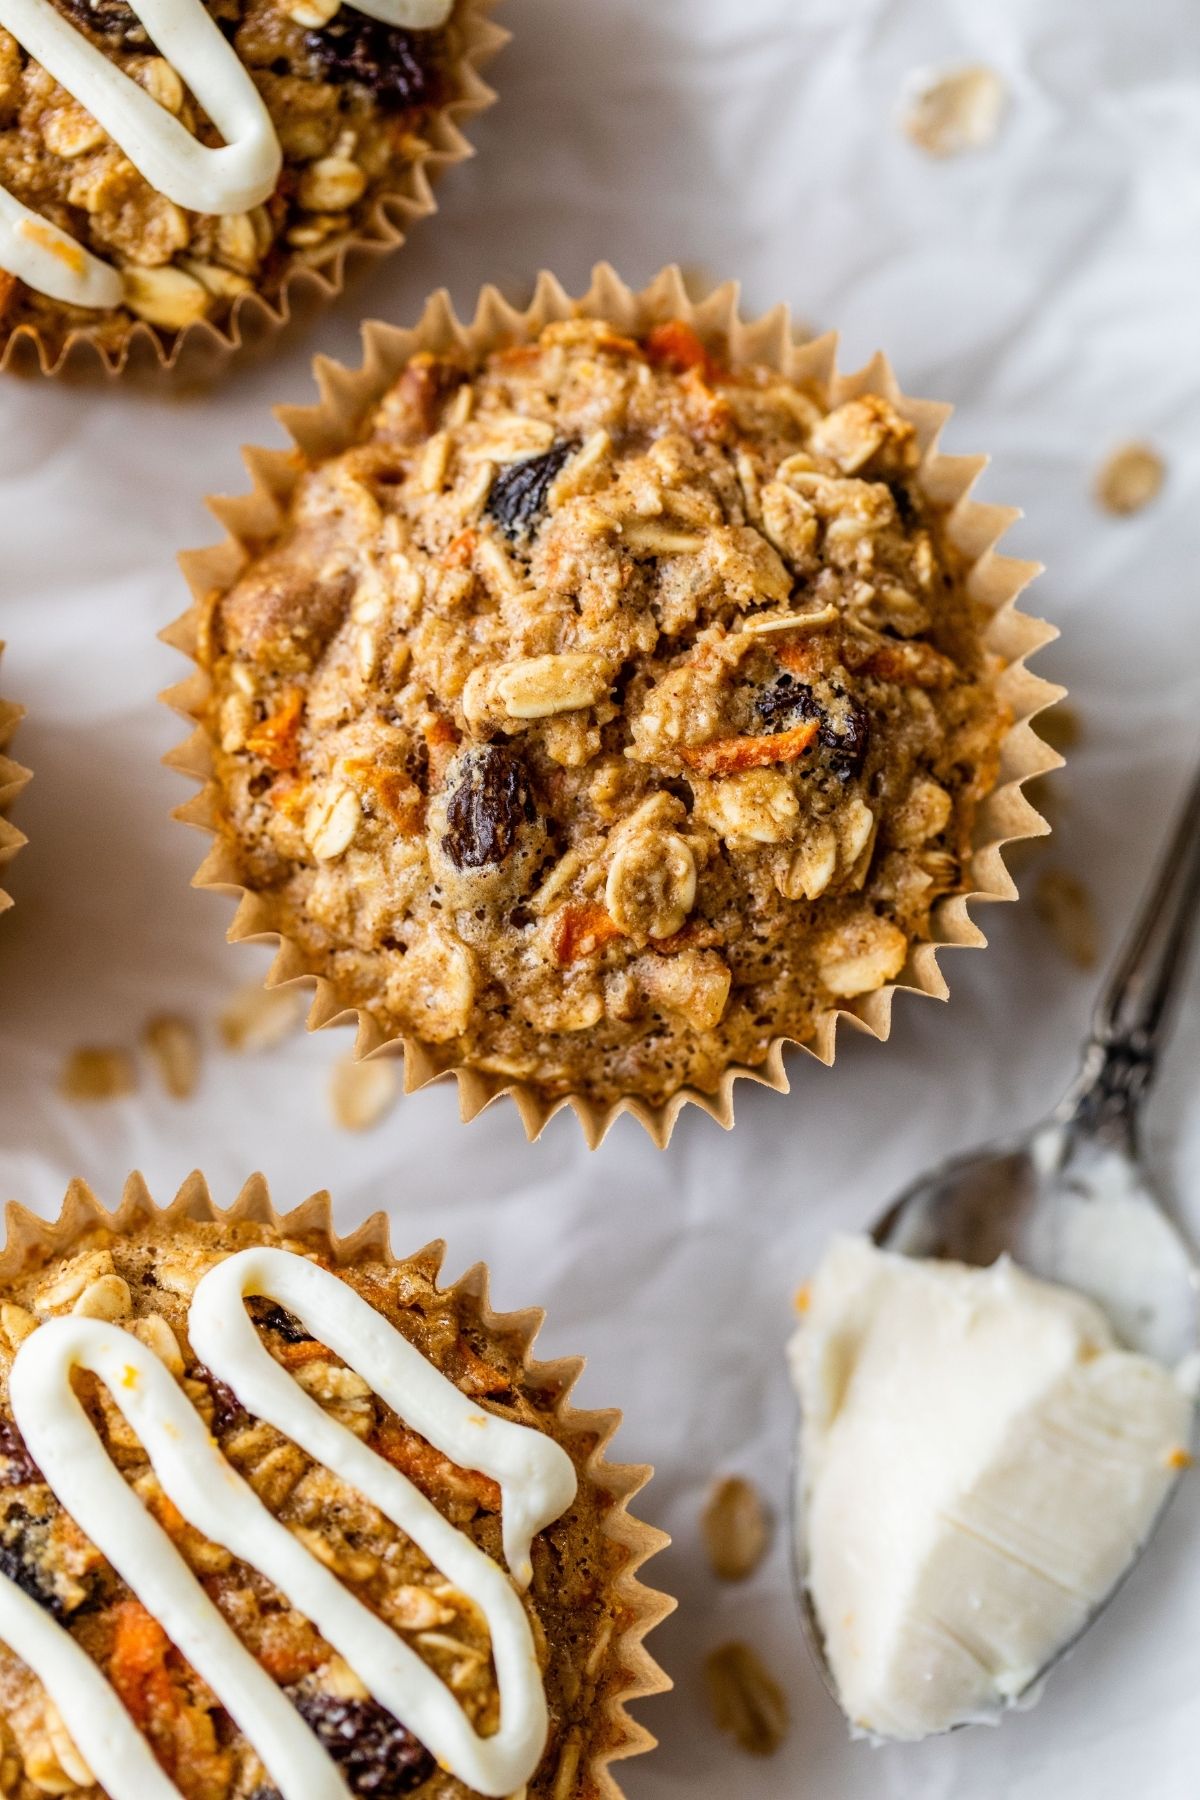 Oatmeal cup made with shredded carrot, raisins and walnuts.